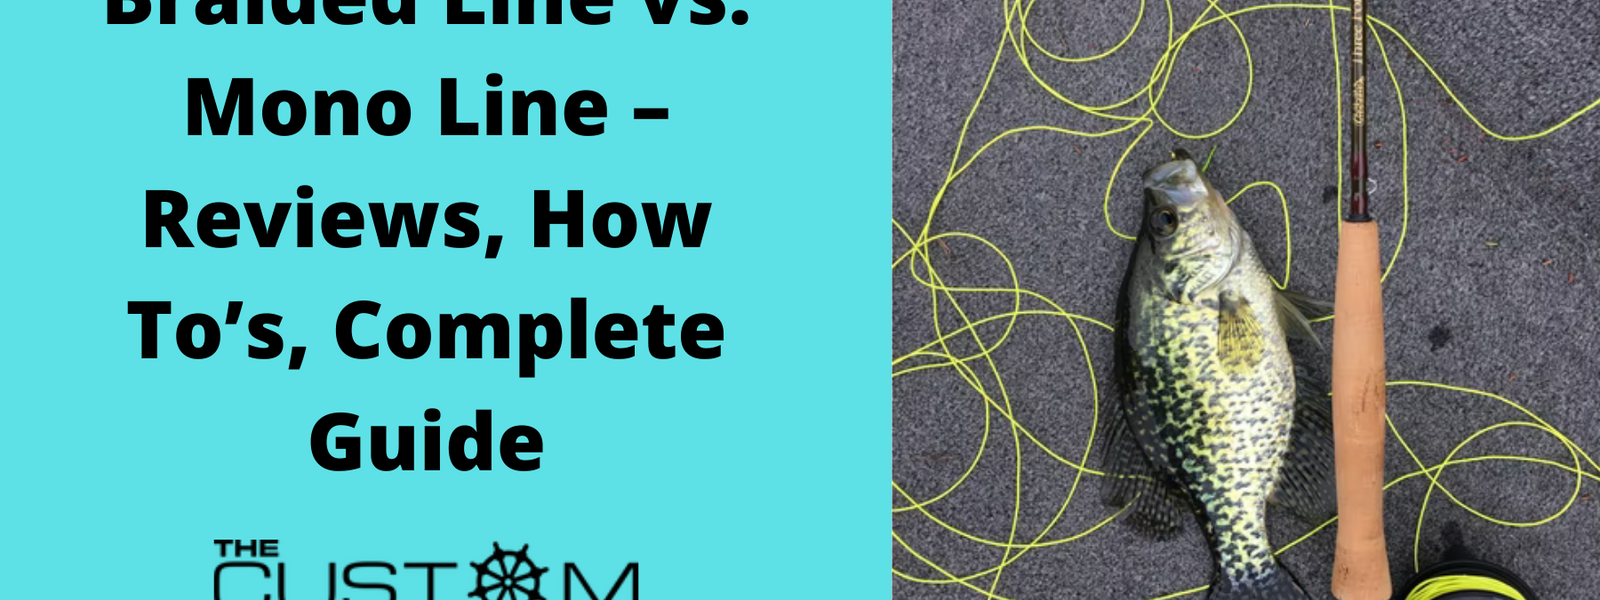 Braided Line vs. Mono Line – Reviews, How To's, Complete Guide